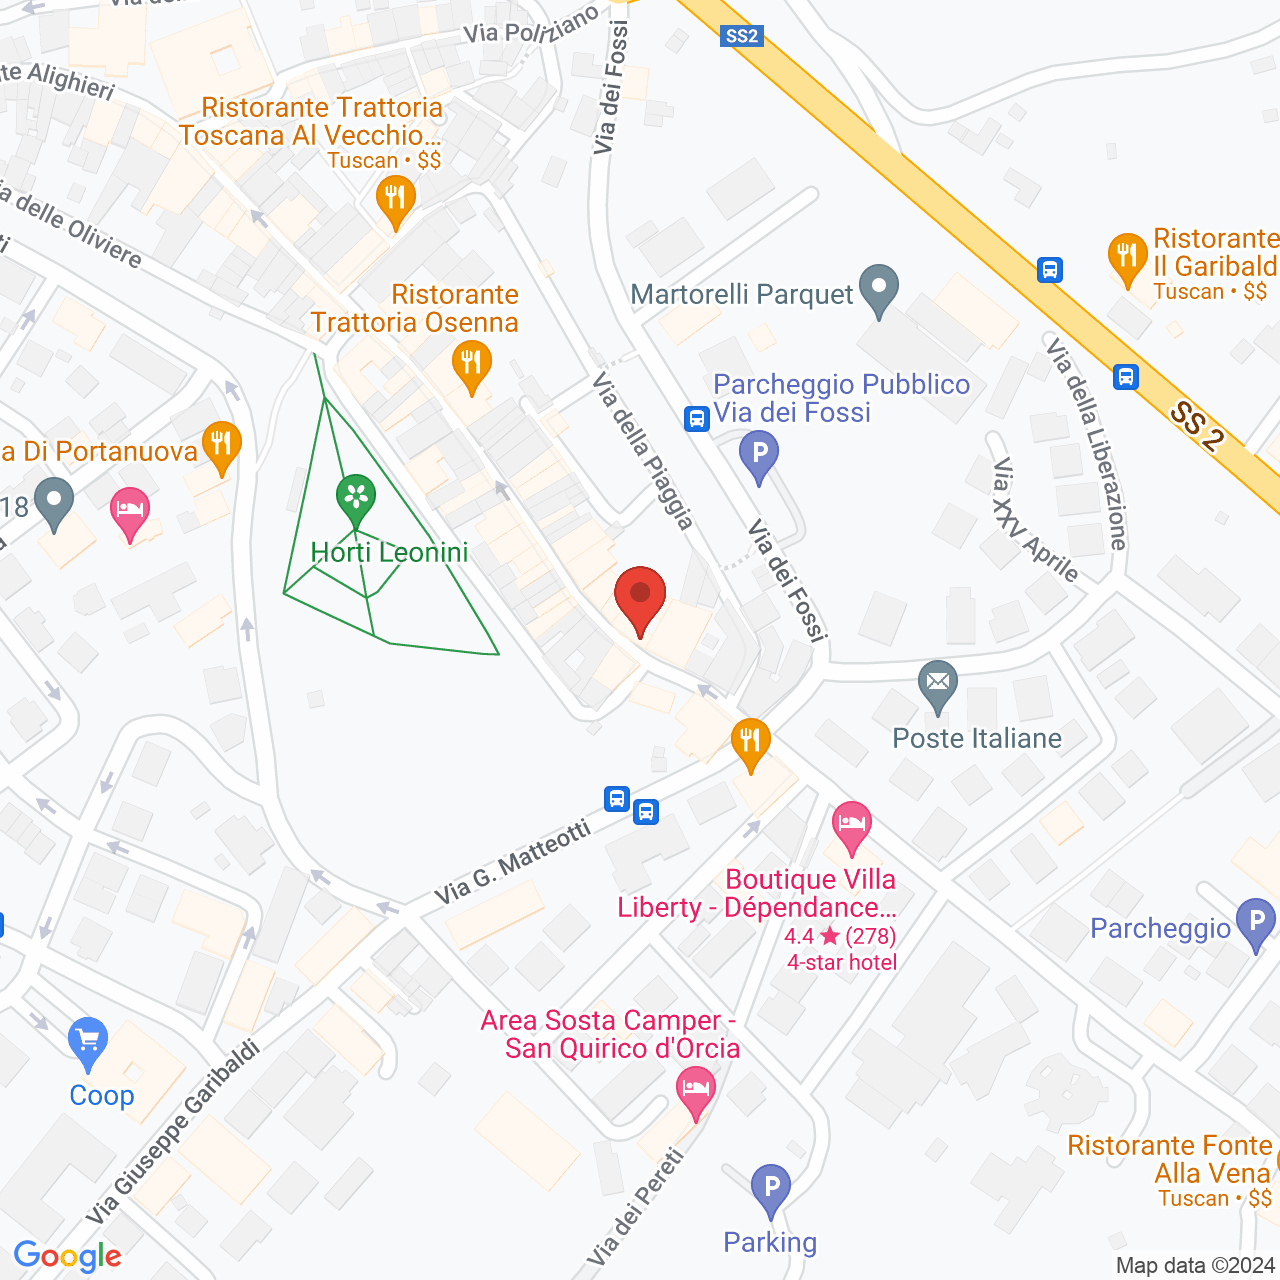 https://maps.googleapis.com/maps/api/staticmap?zoom=10&maptype=hybrid&scale=4&center=43.0581804,11.6060636&markers=color:red%7C%7C43.0581804,11.6060636&size=1000x1000&key=AIzaSyAQg6Liu52-a7wn17F9B-5c4QmJ9kTO3Mo